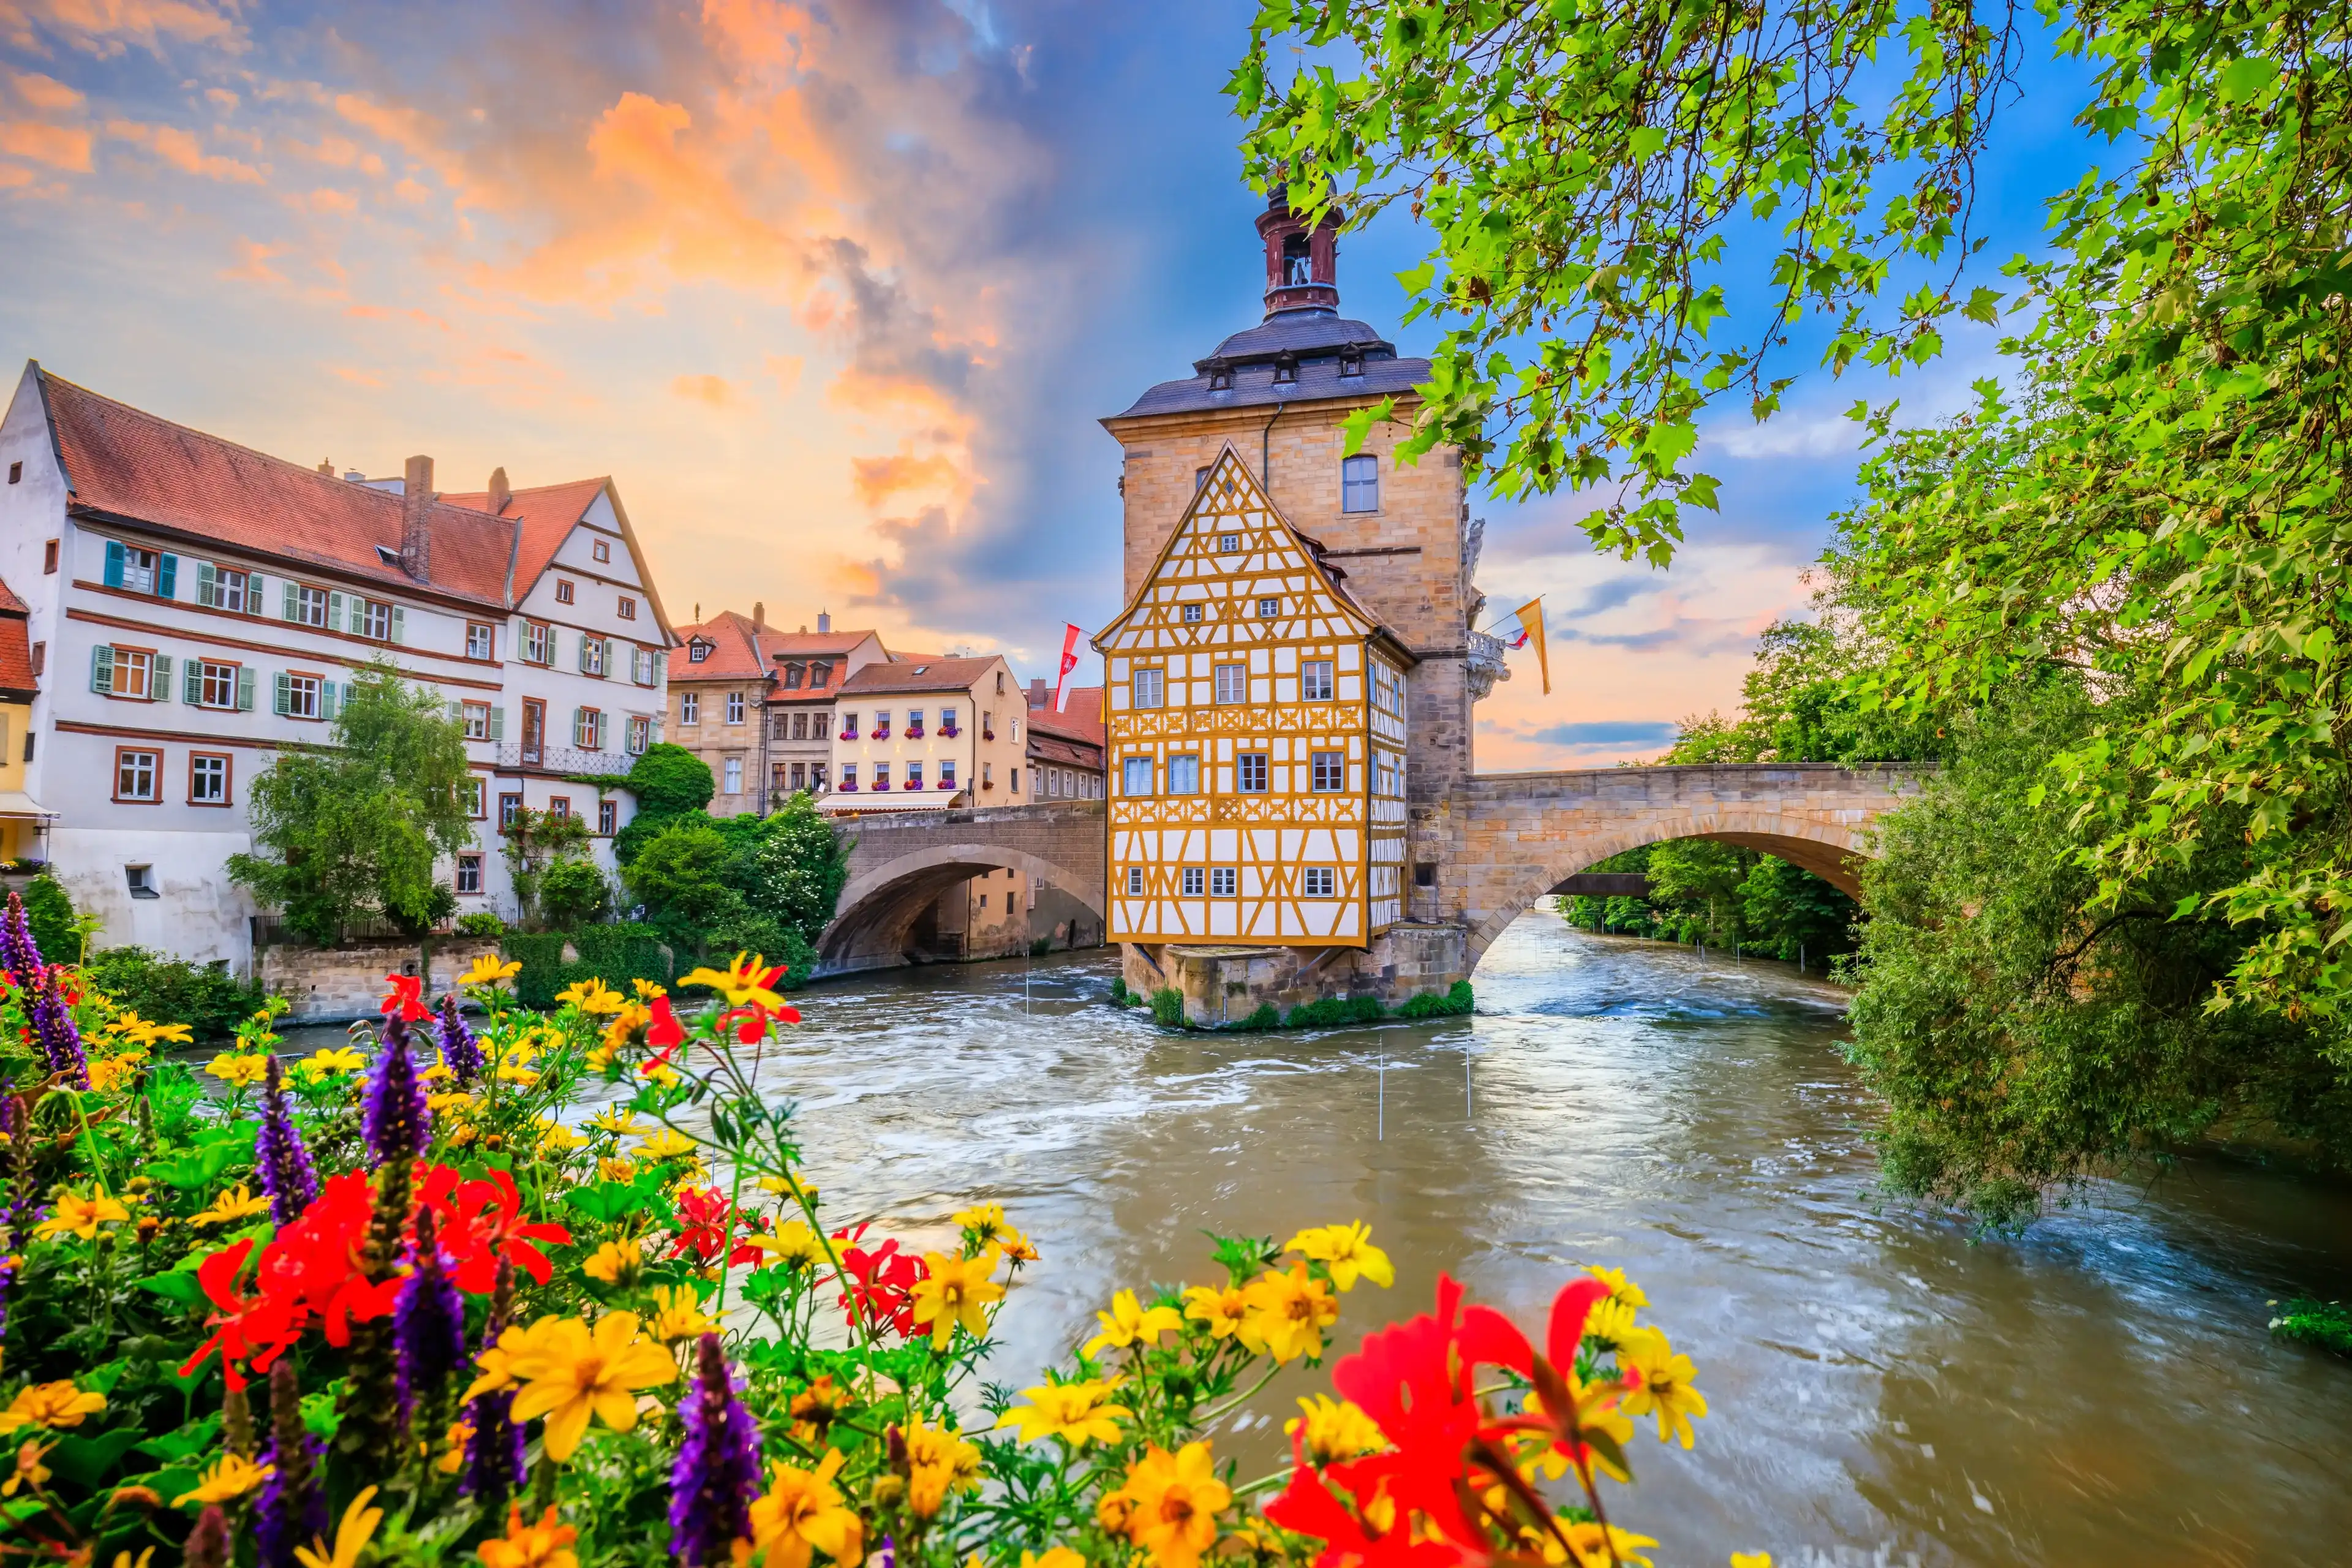 Best Bamberg hotels. Cheap hotels in Bamberg, Germany